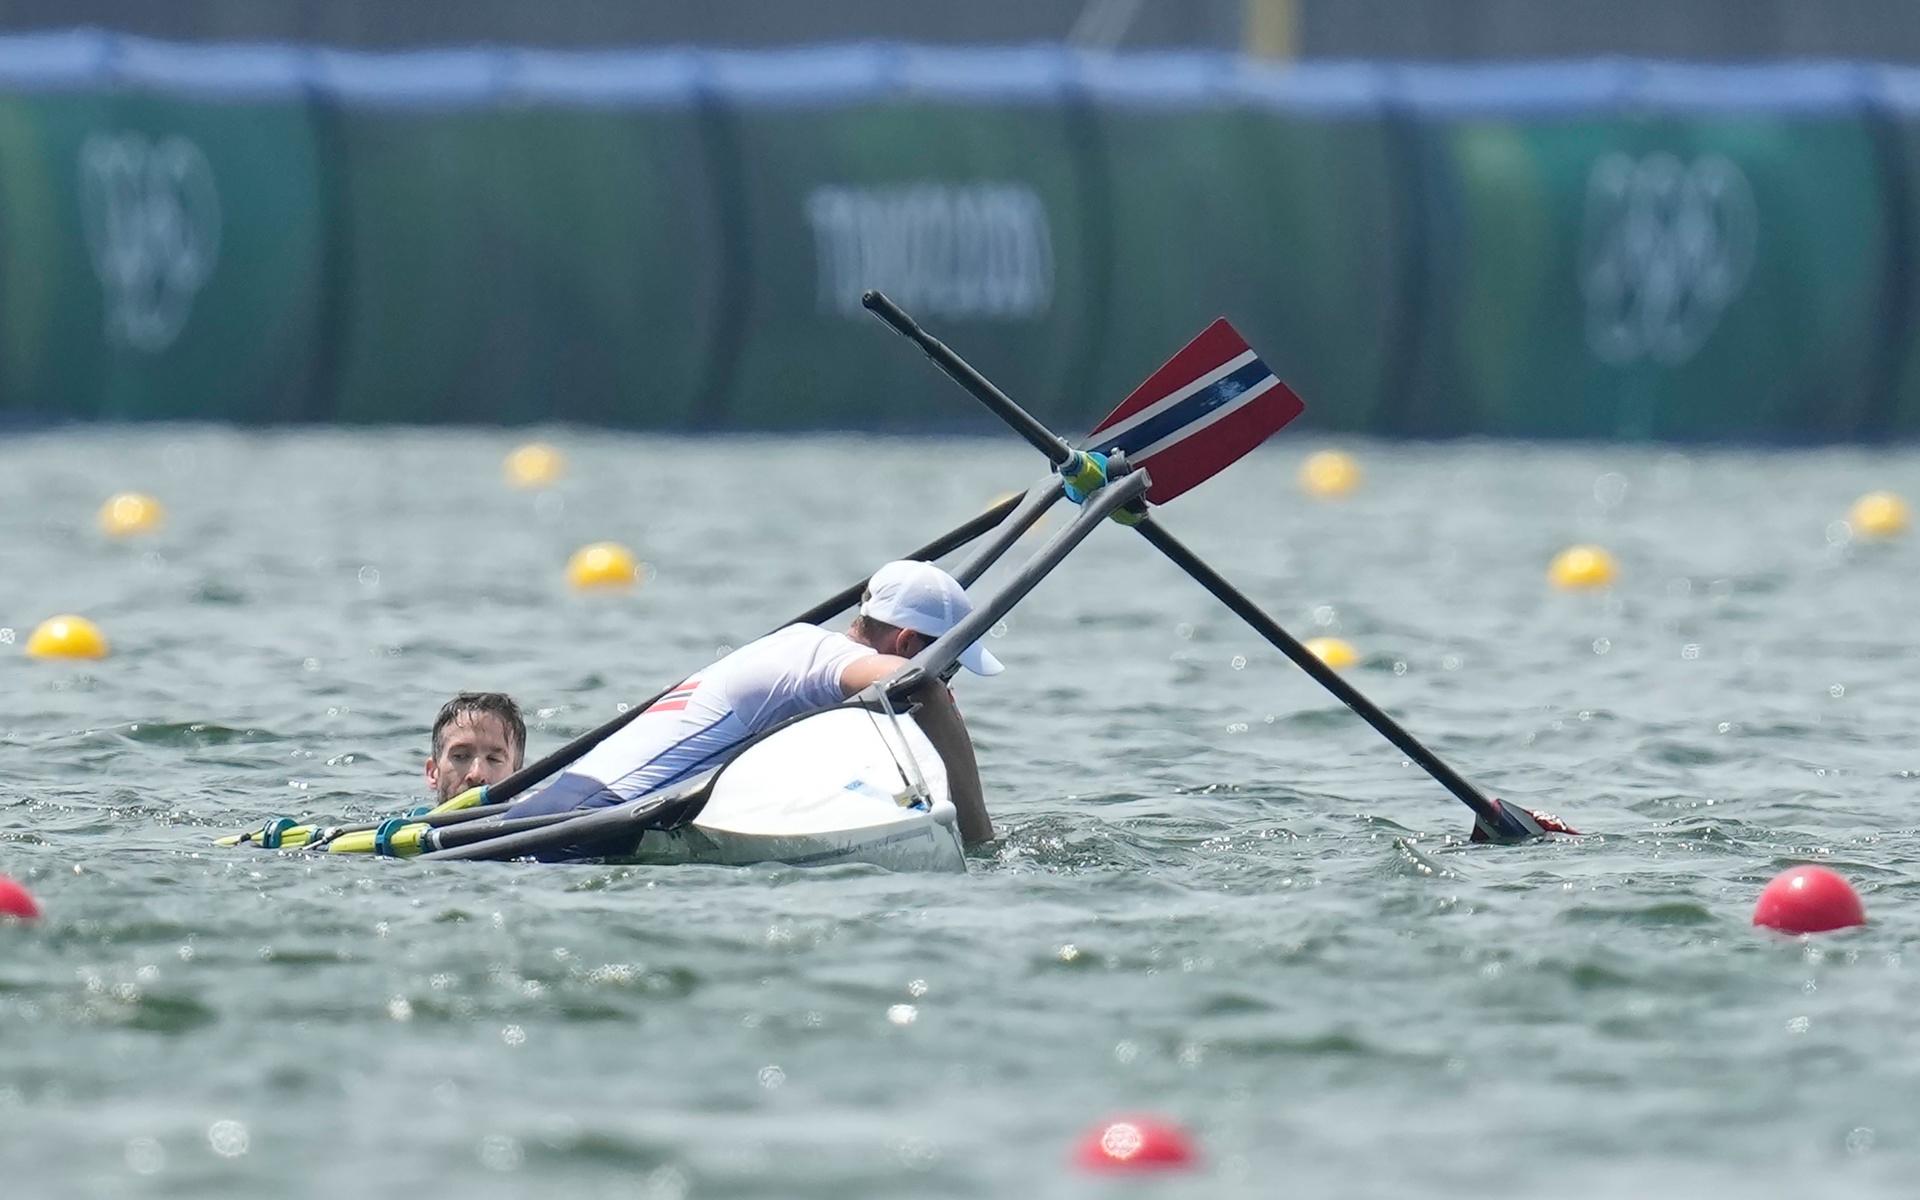 Kristoffer Brun and Are Weierholt Strandli of Norway hold on a boat after capsizing in the lightweight men&apos;s rowing double sculls semifinal at the 2020 Summer Olympics, Wednesday, July 28, 2021, in Tokyo, Japan. (AP Photo/Lee Jin-man)  OLYJM150